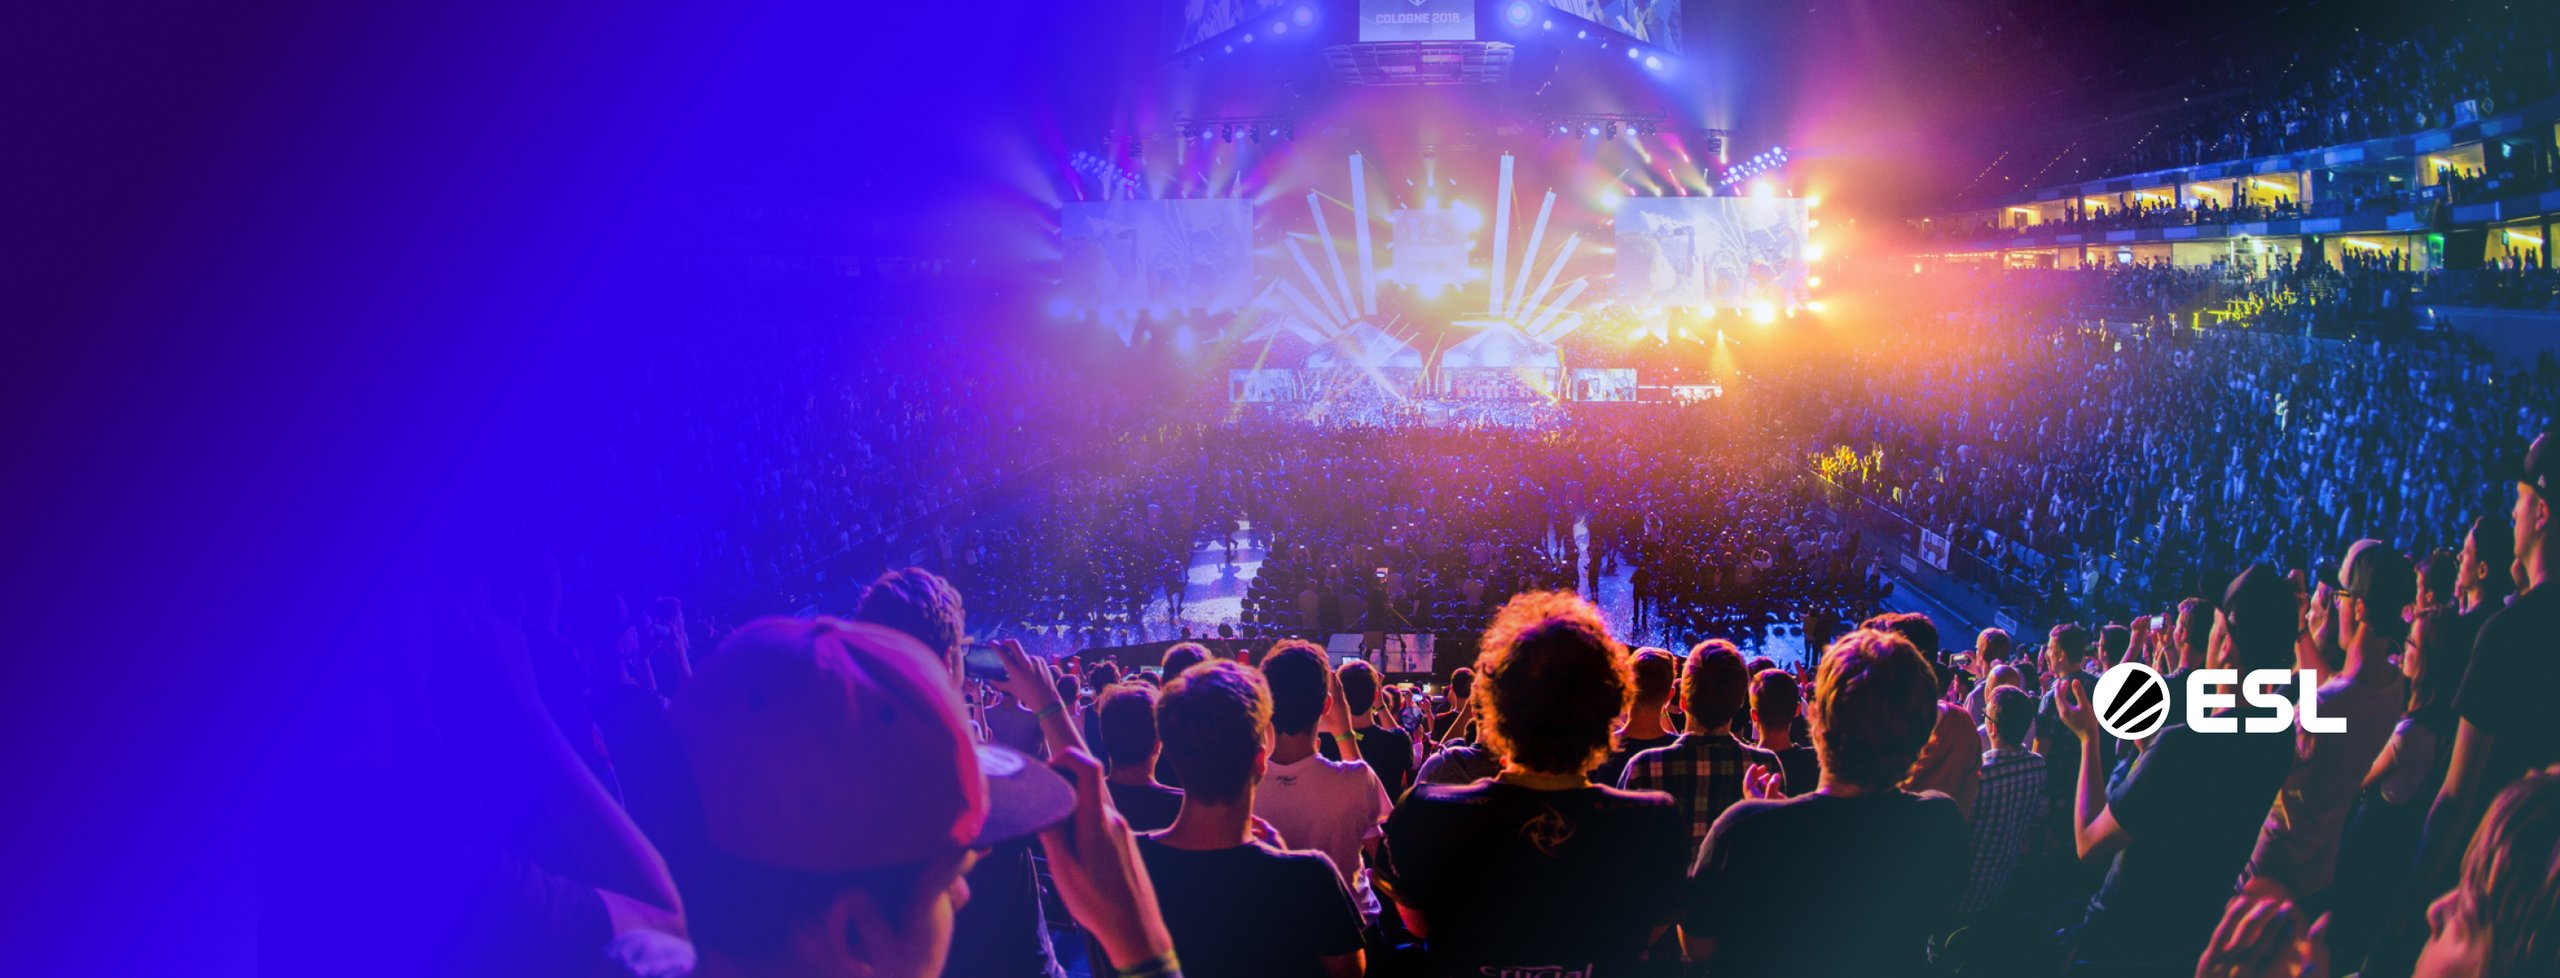 A large crowd of people watching an esports match in an arena